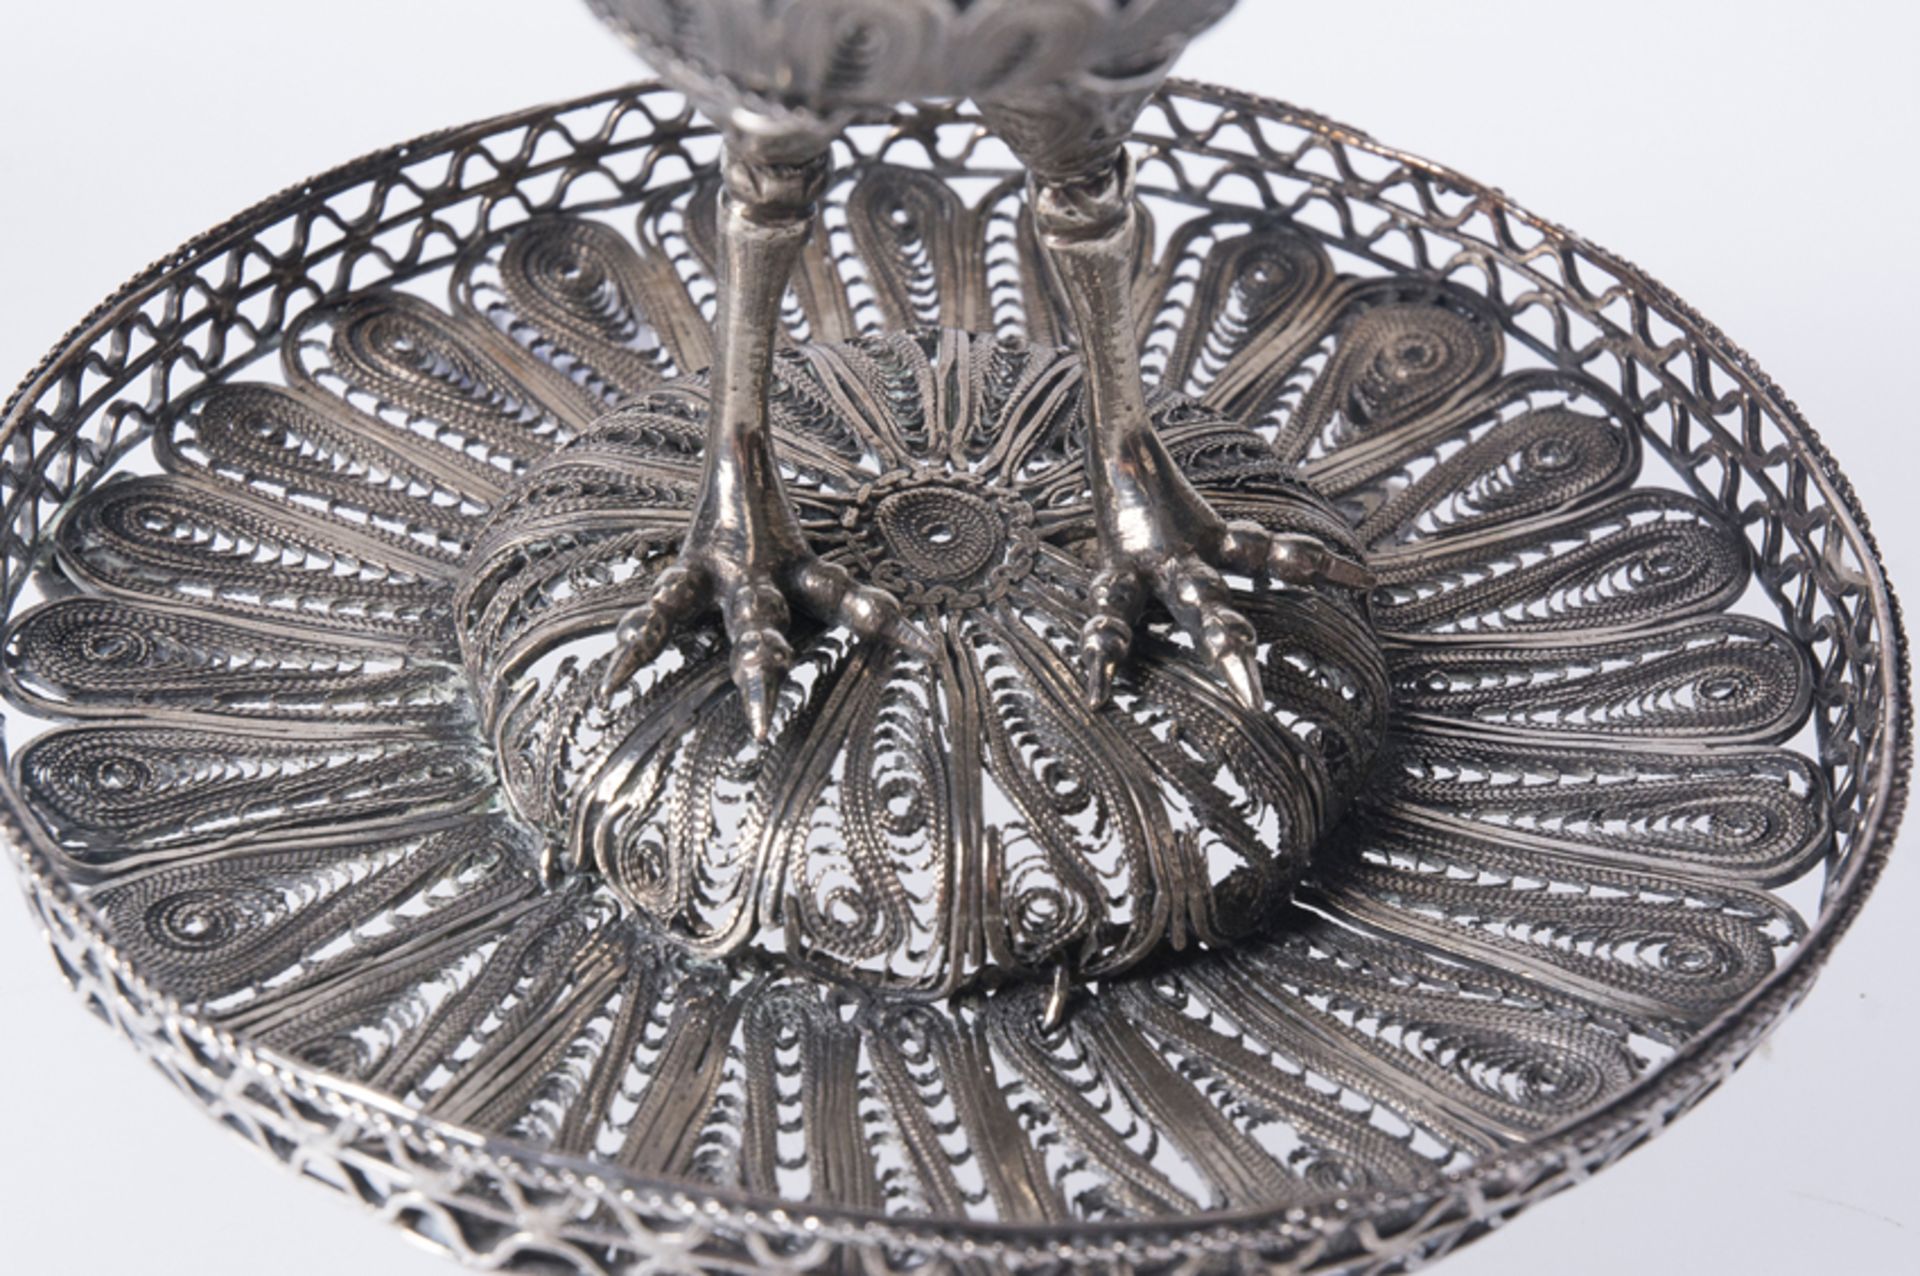 Pair of turkey-shaped incense burners in silver filigree, and fretworked and chased cast silver. Co - Image 9 of 10